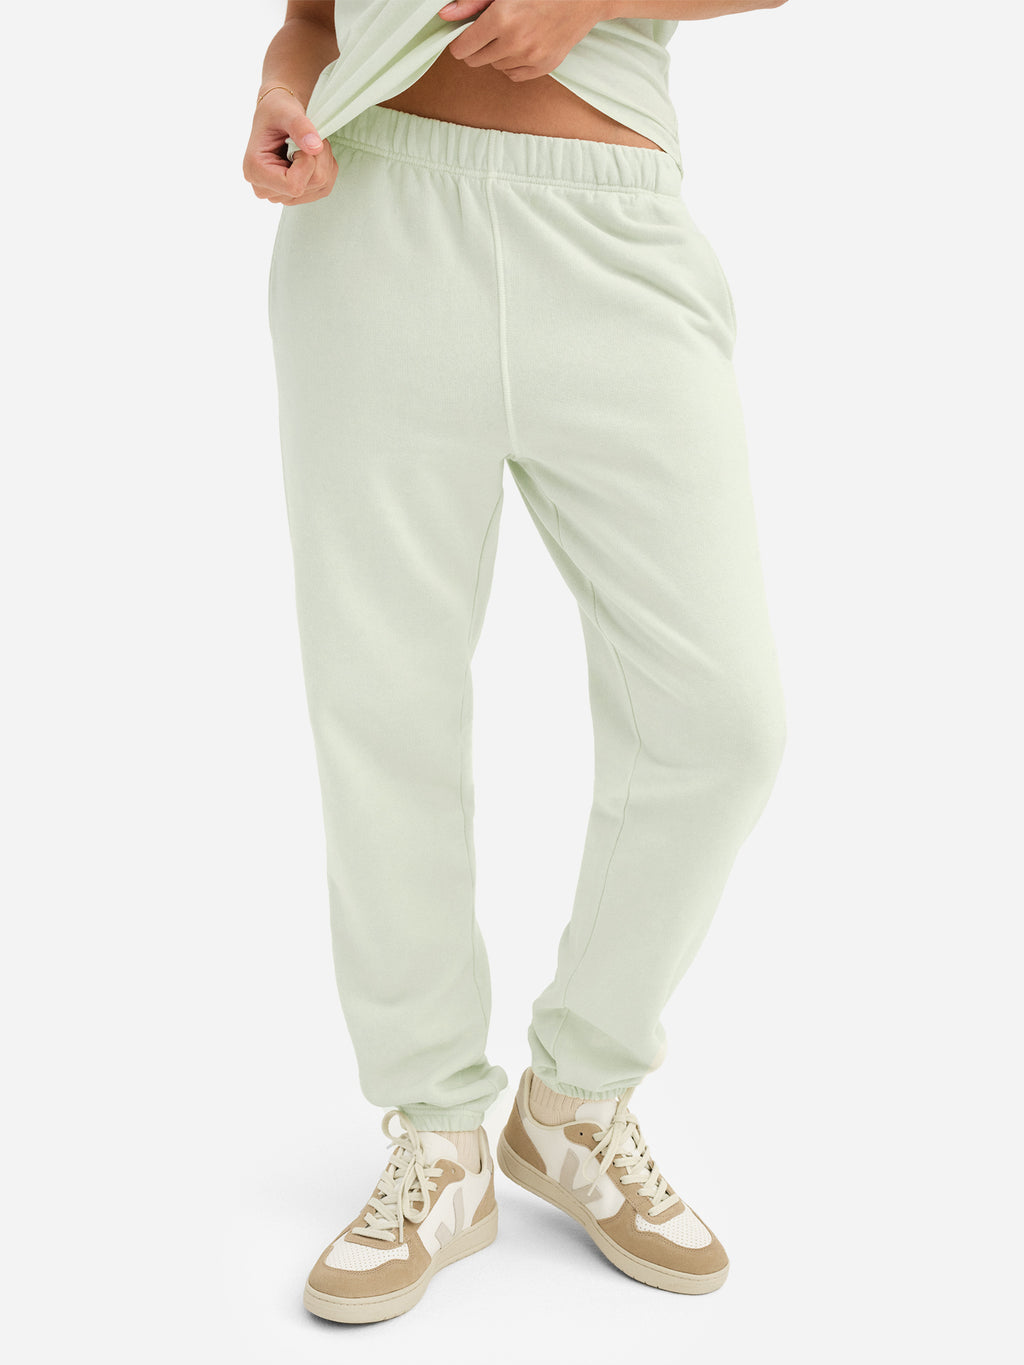 BALEAF's £30 cosy cotton sweatpants are proving perfect for winter